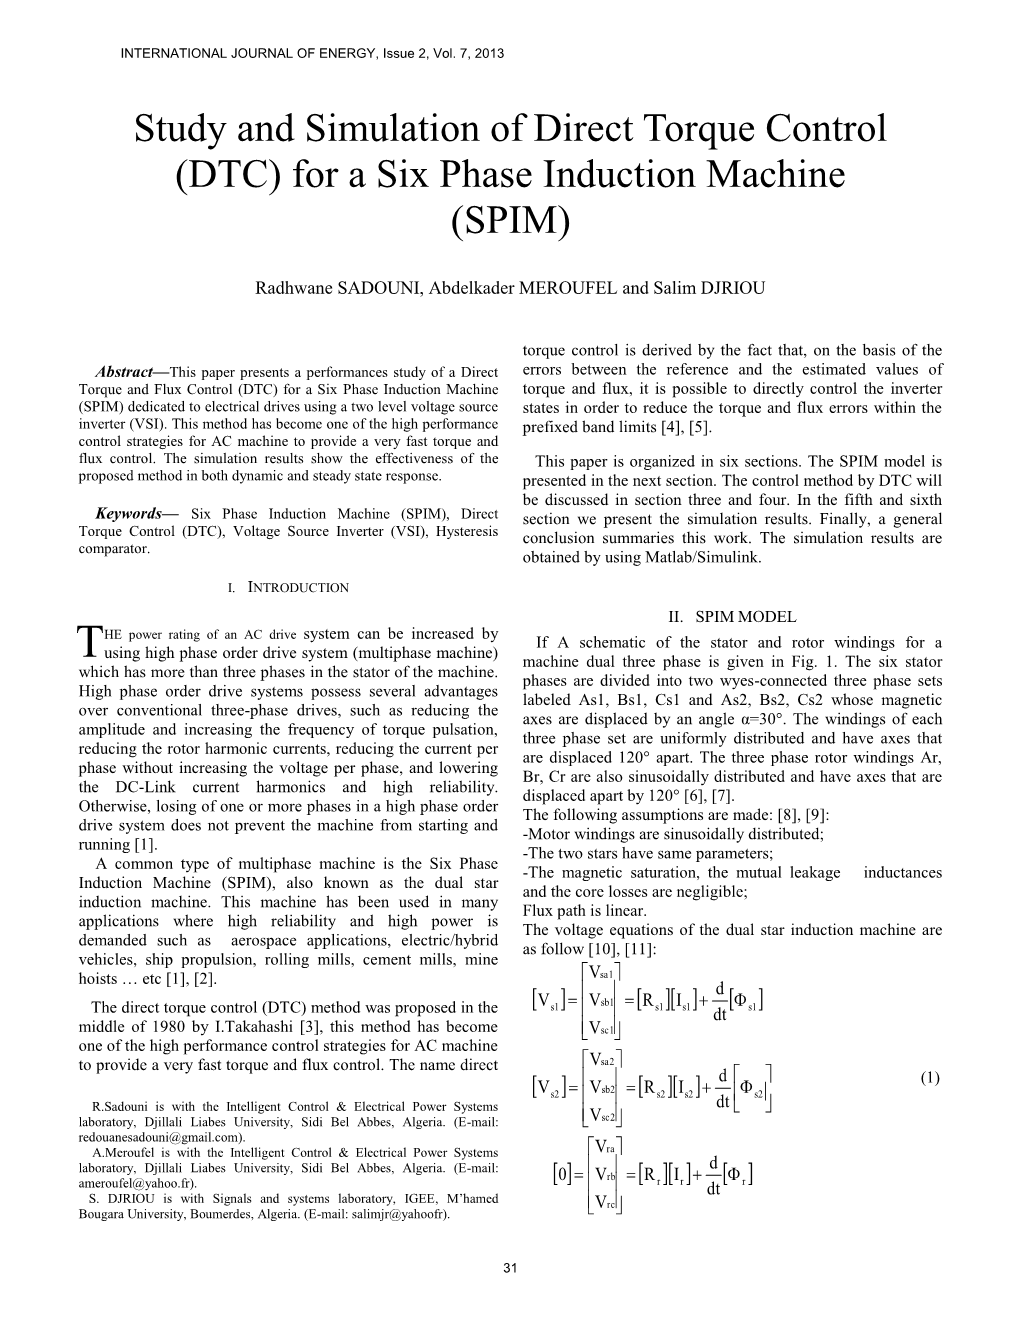 Study and Simulation of Direct Torque Control (DTC) for a Six Phase Induction Machine (SPIM)